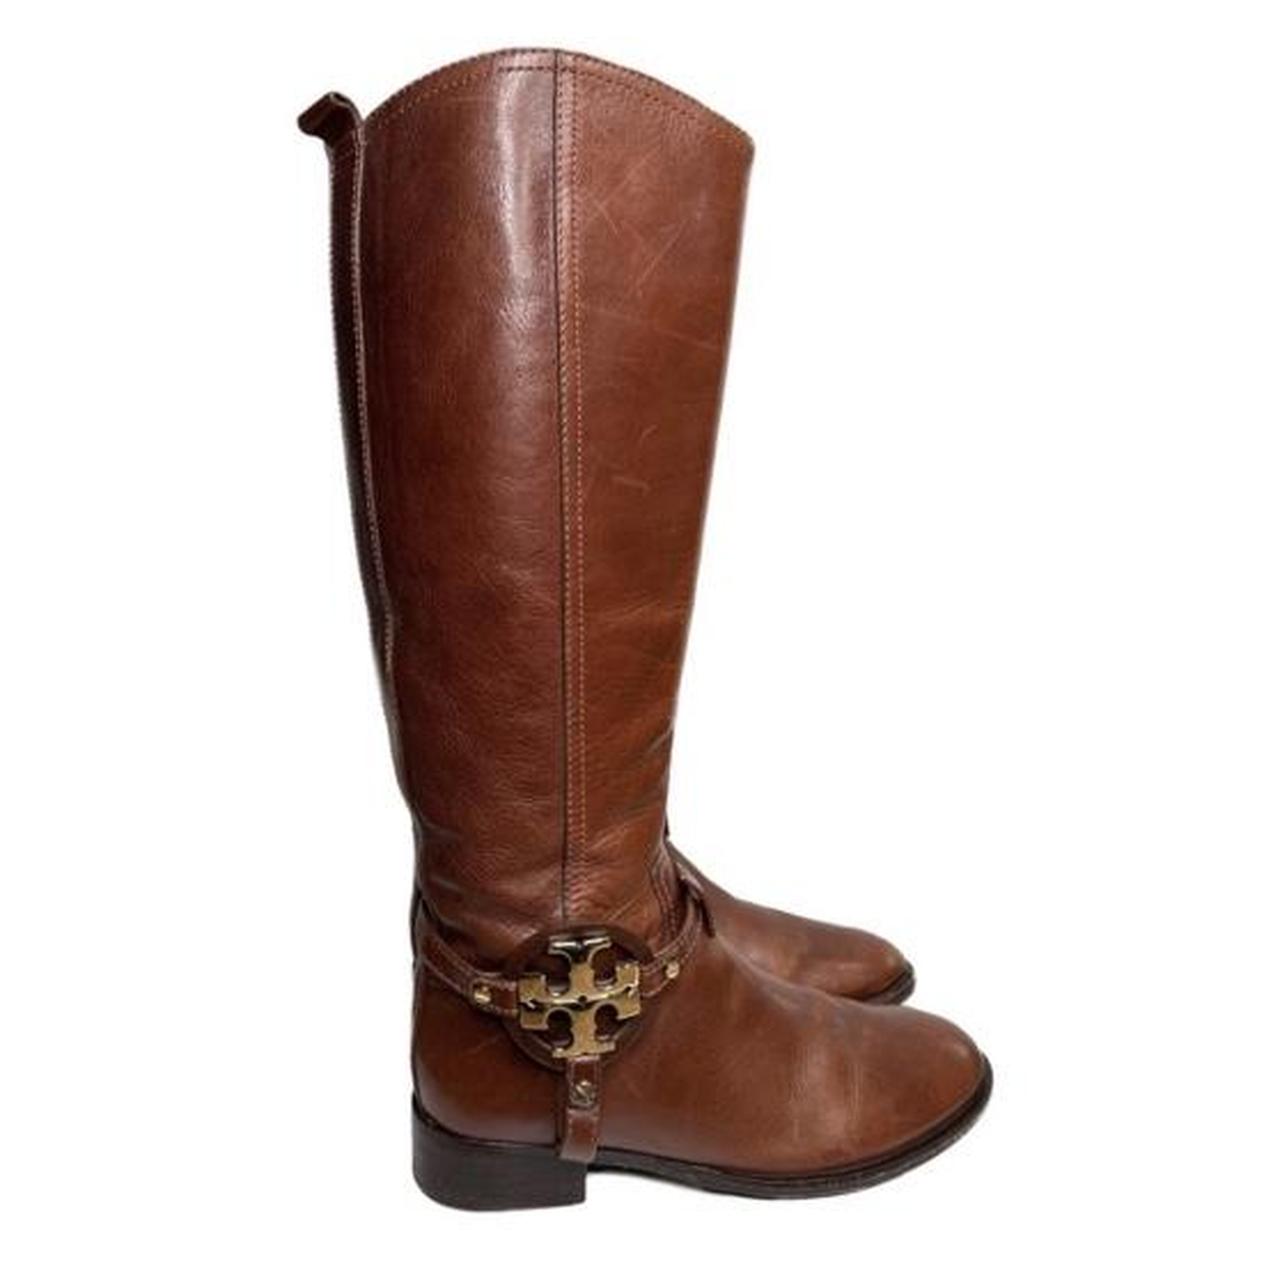 Tory Burch Women's Brown and Gold Boots | Depop